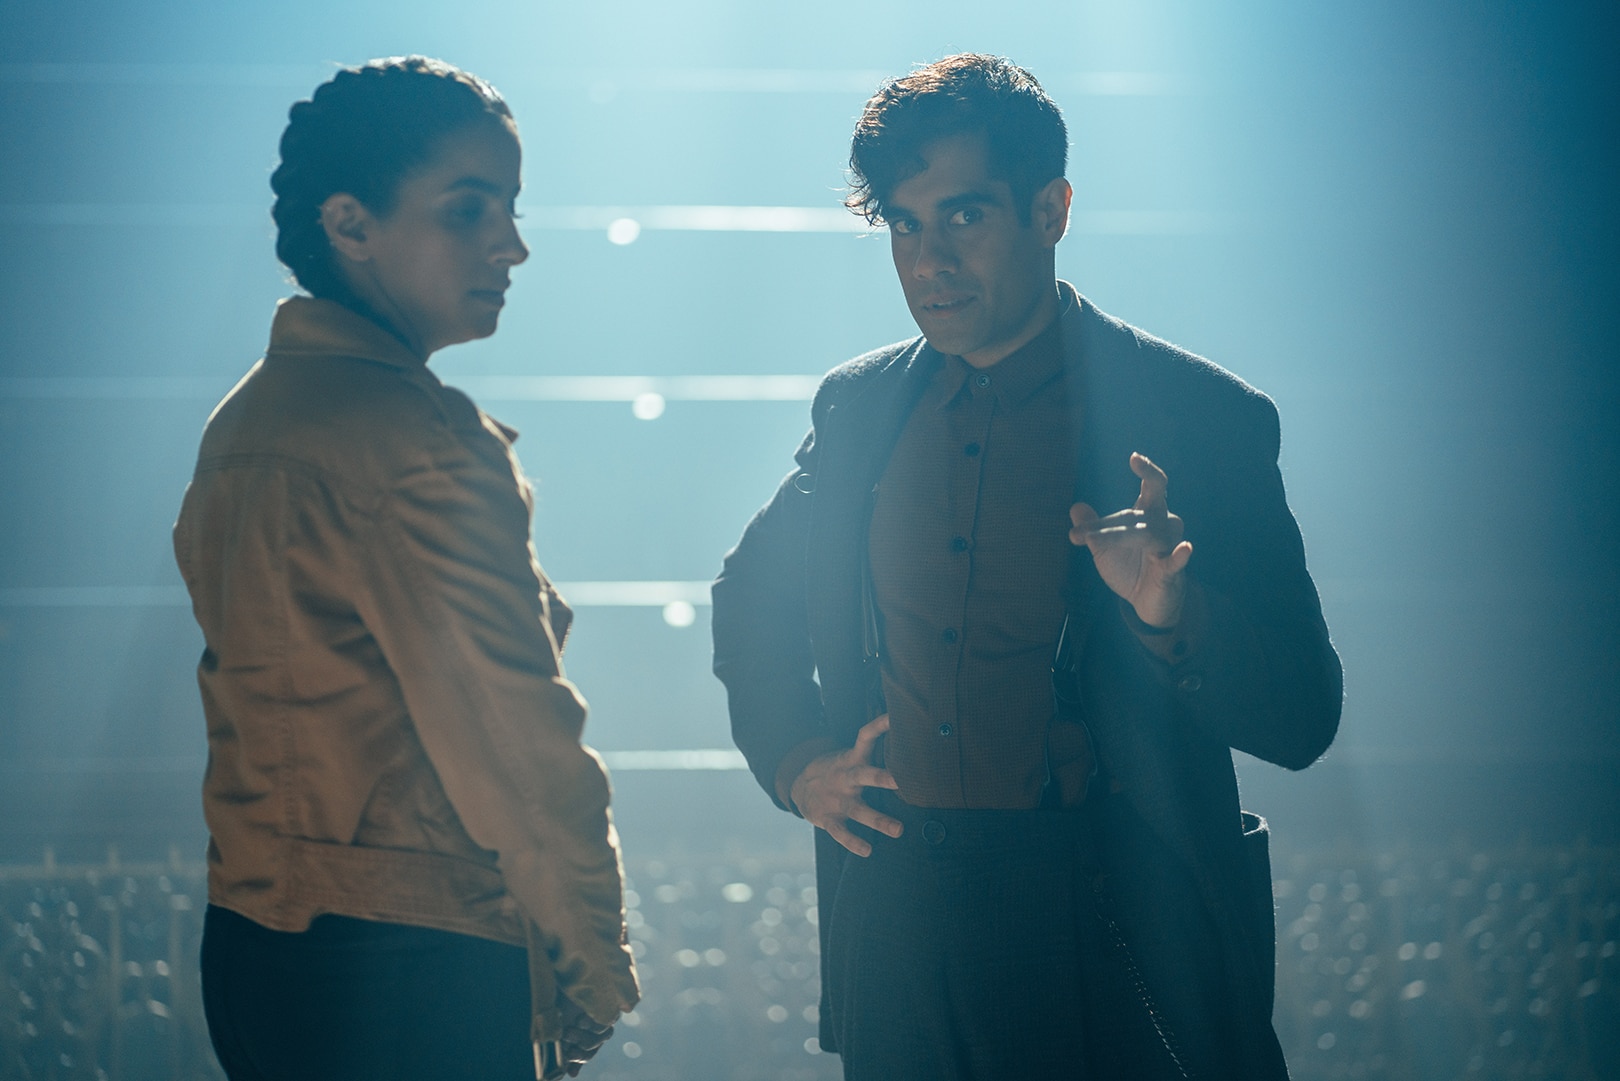 Mandip Gill as Yaz and Sacha Dhawan as the Master in 'The Power of the Doctor'